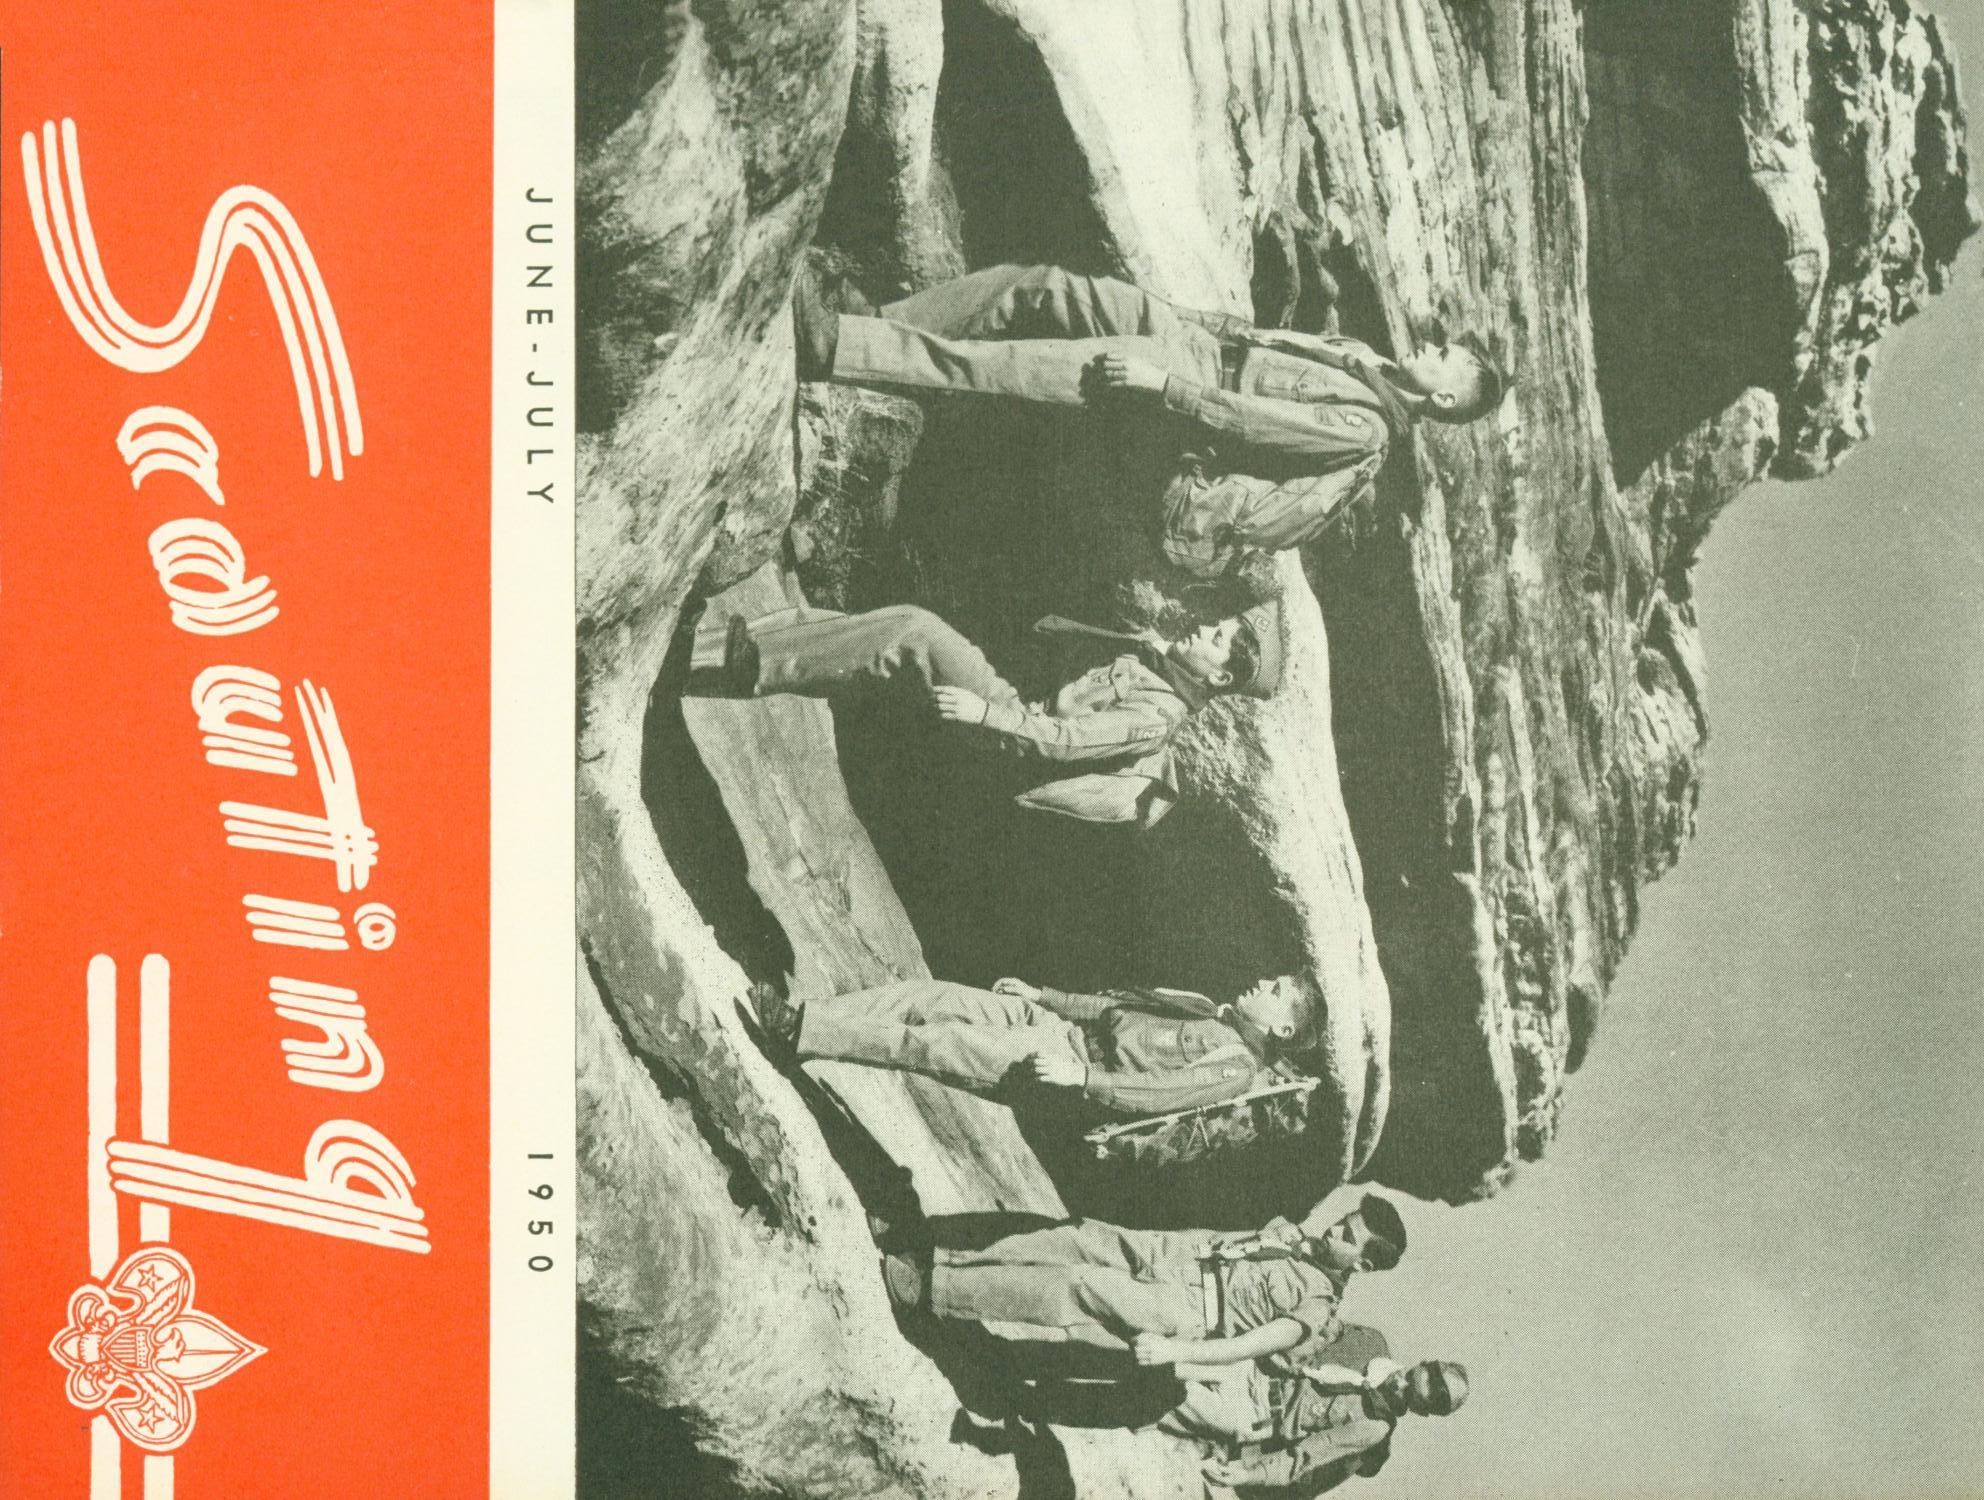 Scouting, Volume 38, Number 6, June-July 1950
                                                
                                                    Front Cover
                                                